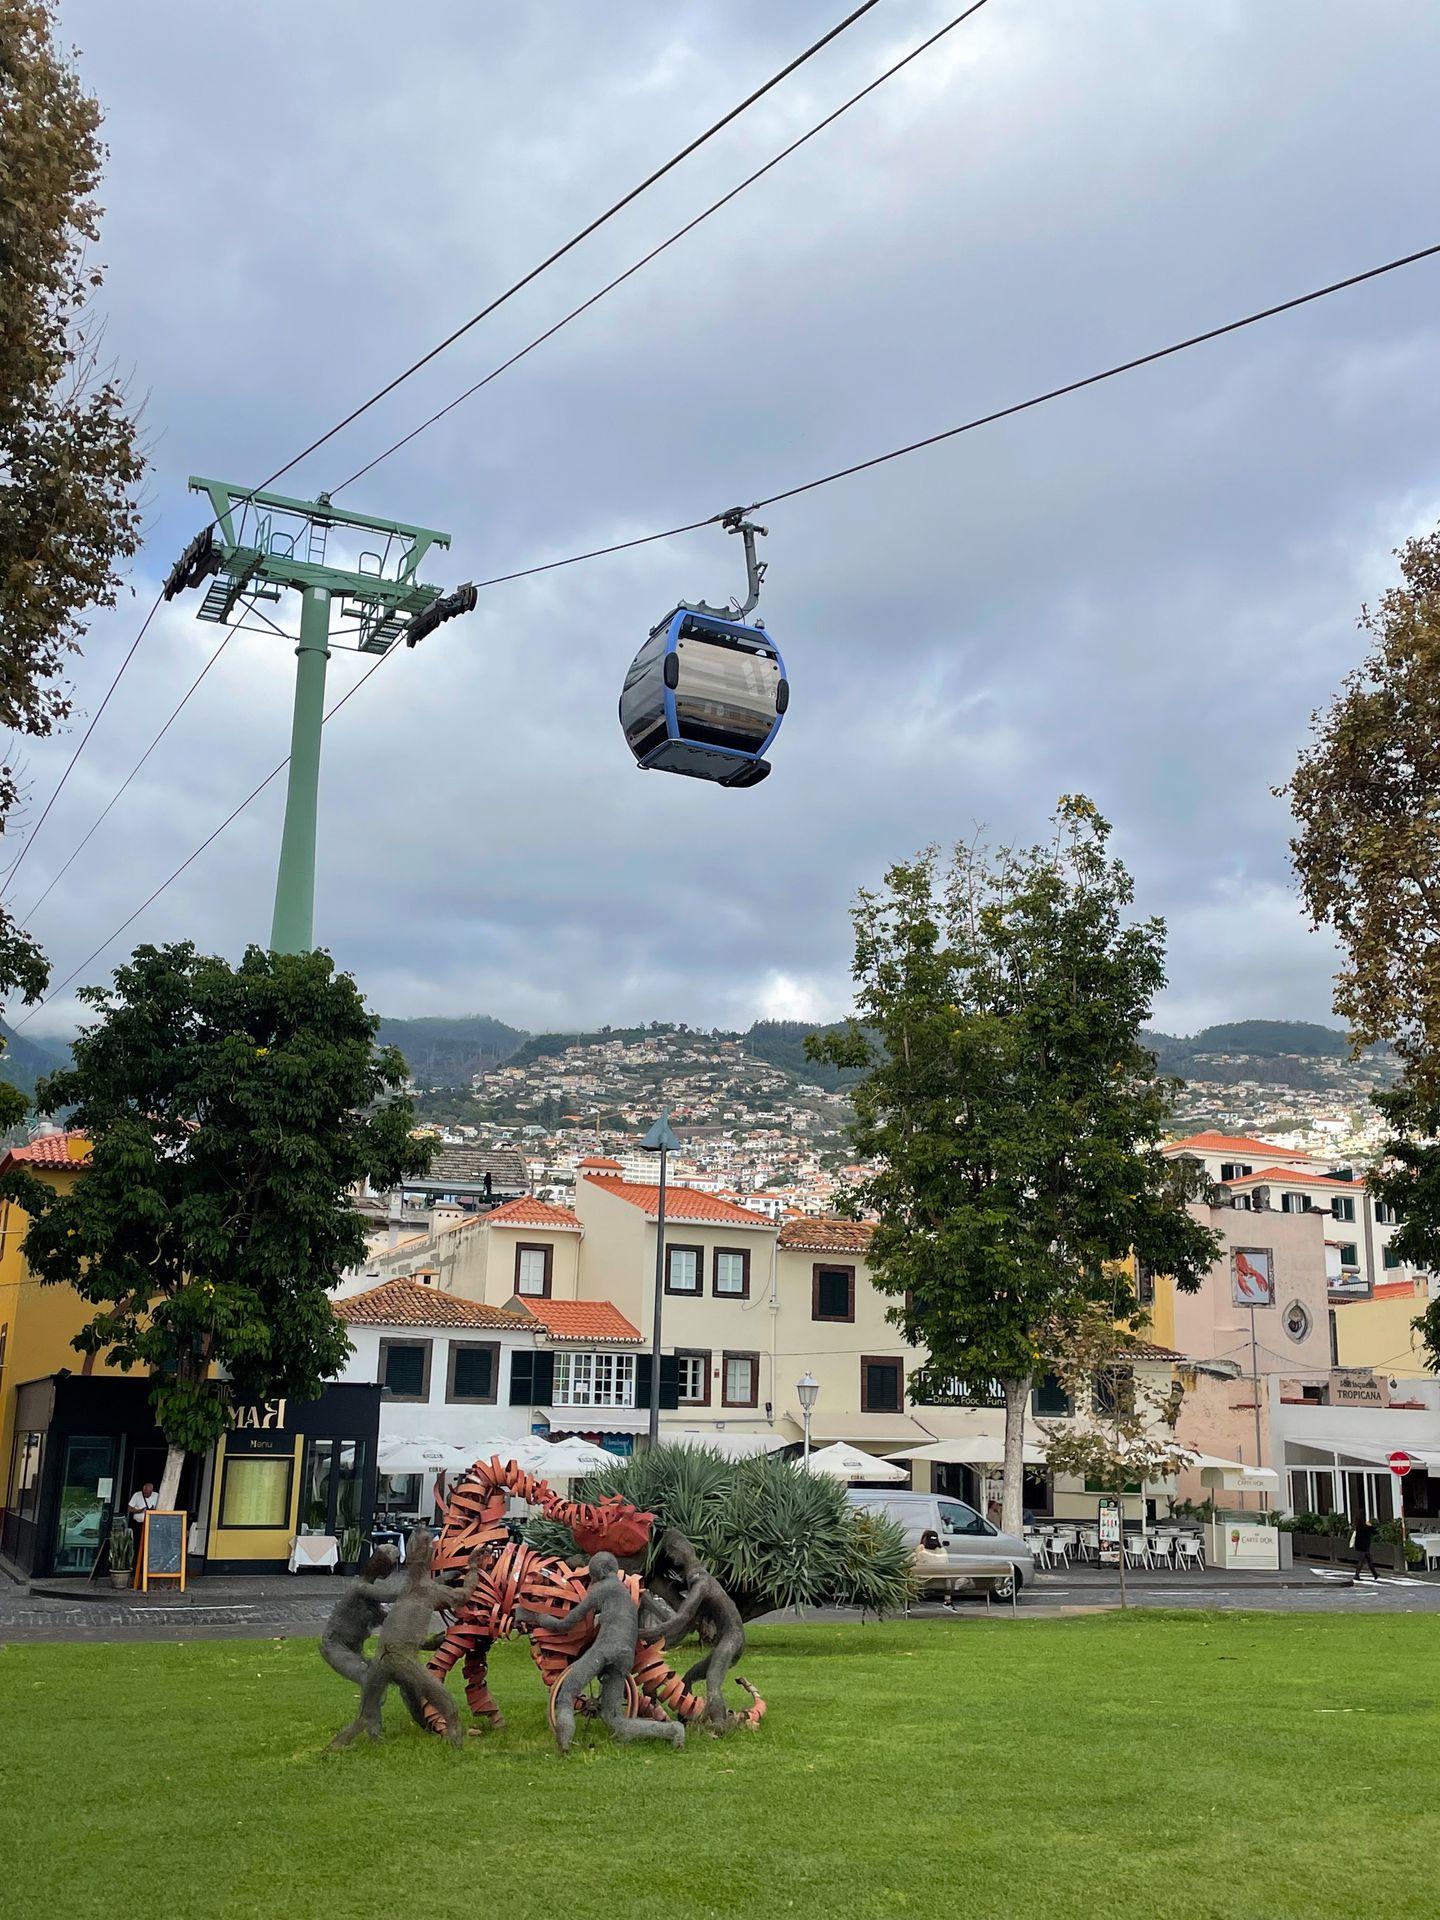 Looking up at a cable car going by in Funchal